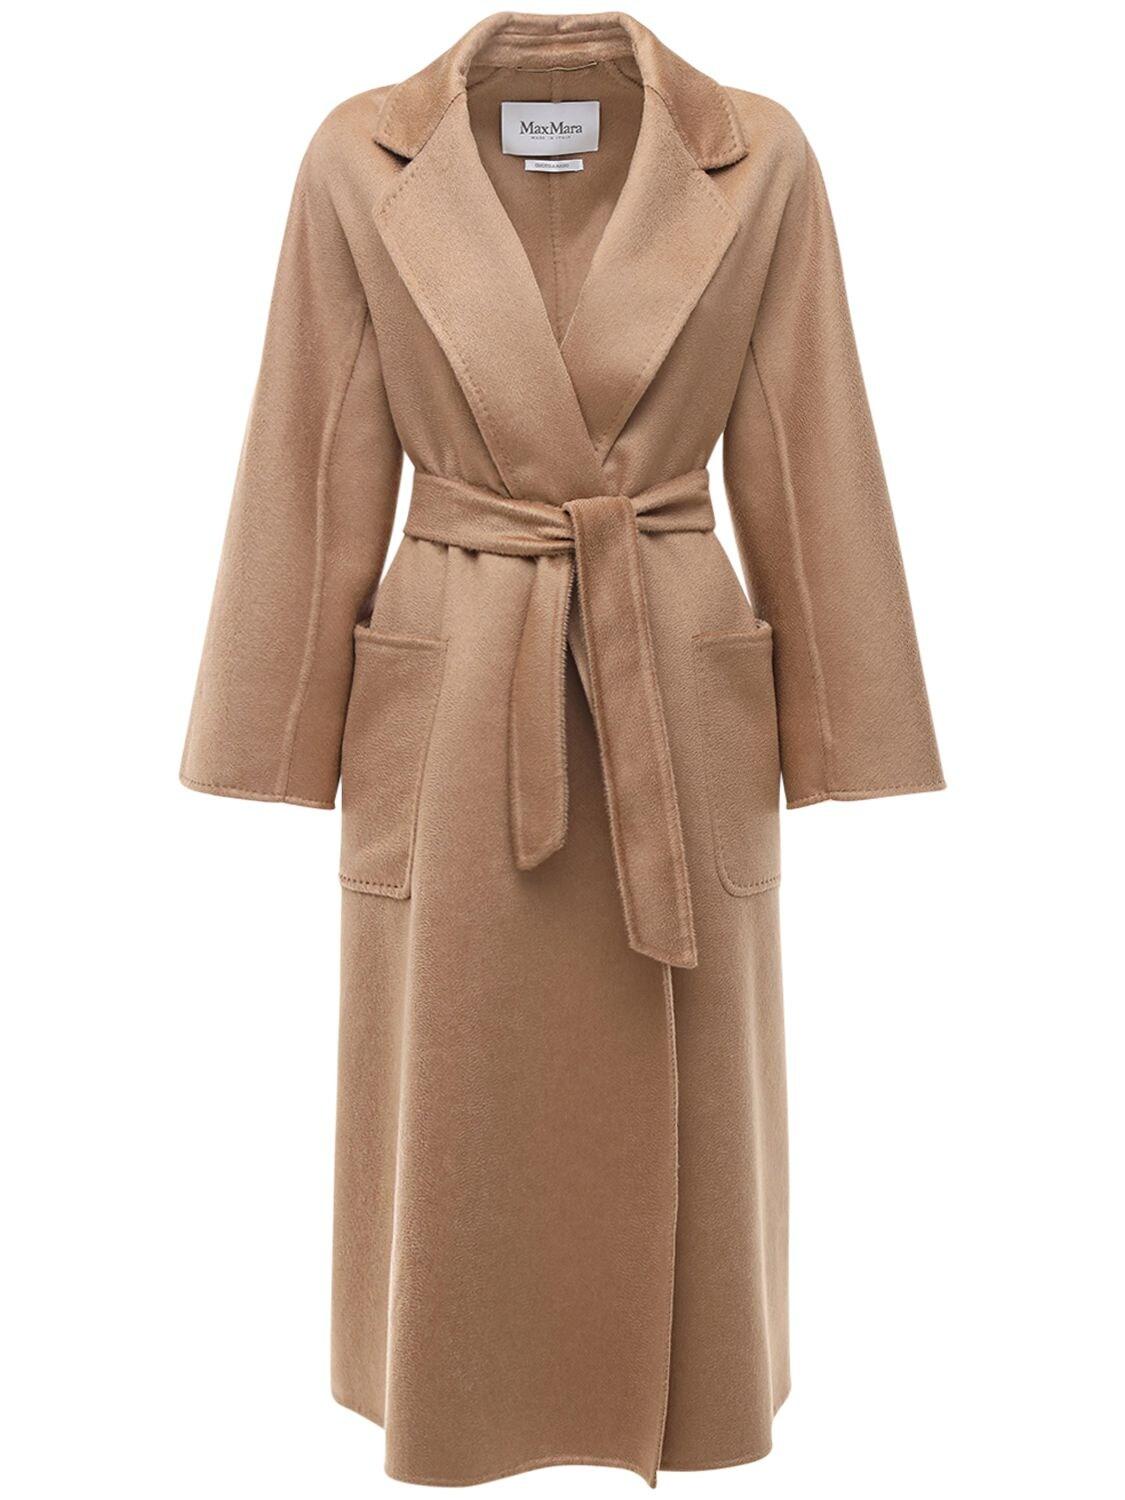 Max Mara Labbro Belted Cashmere Coat in Natural | Lyst